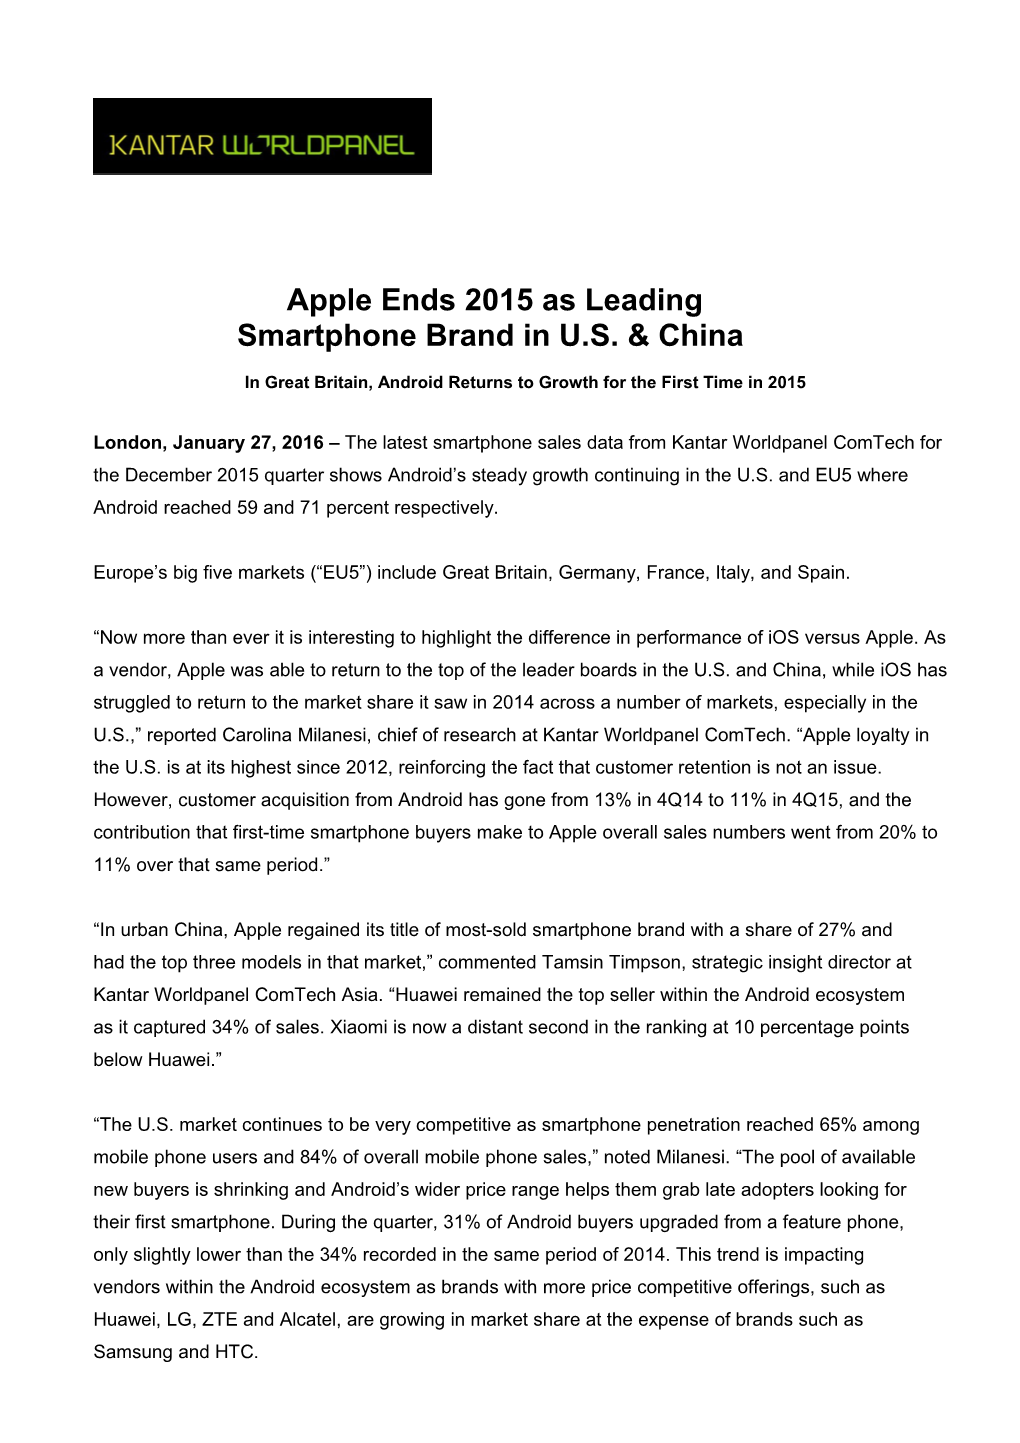 Apple Ends 2015 As Leading Smartphone Brand in U.S. China